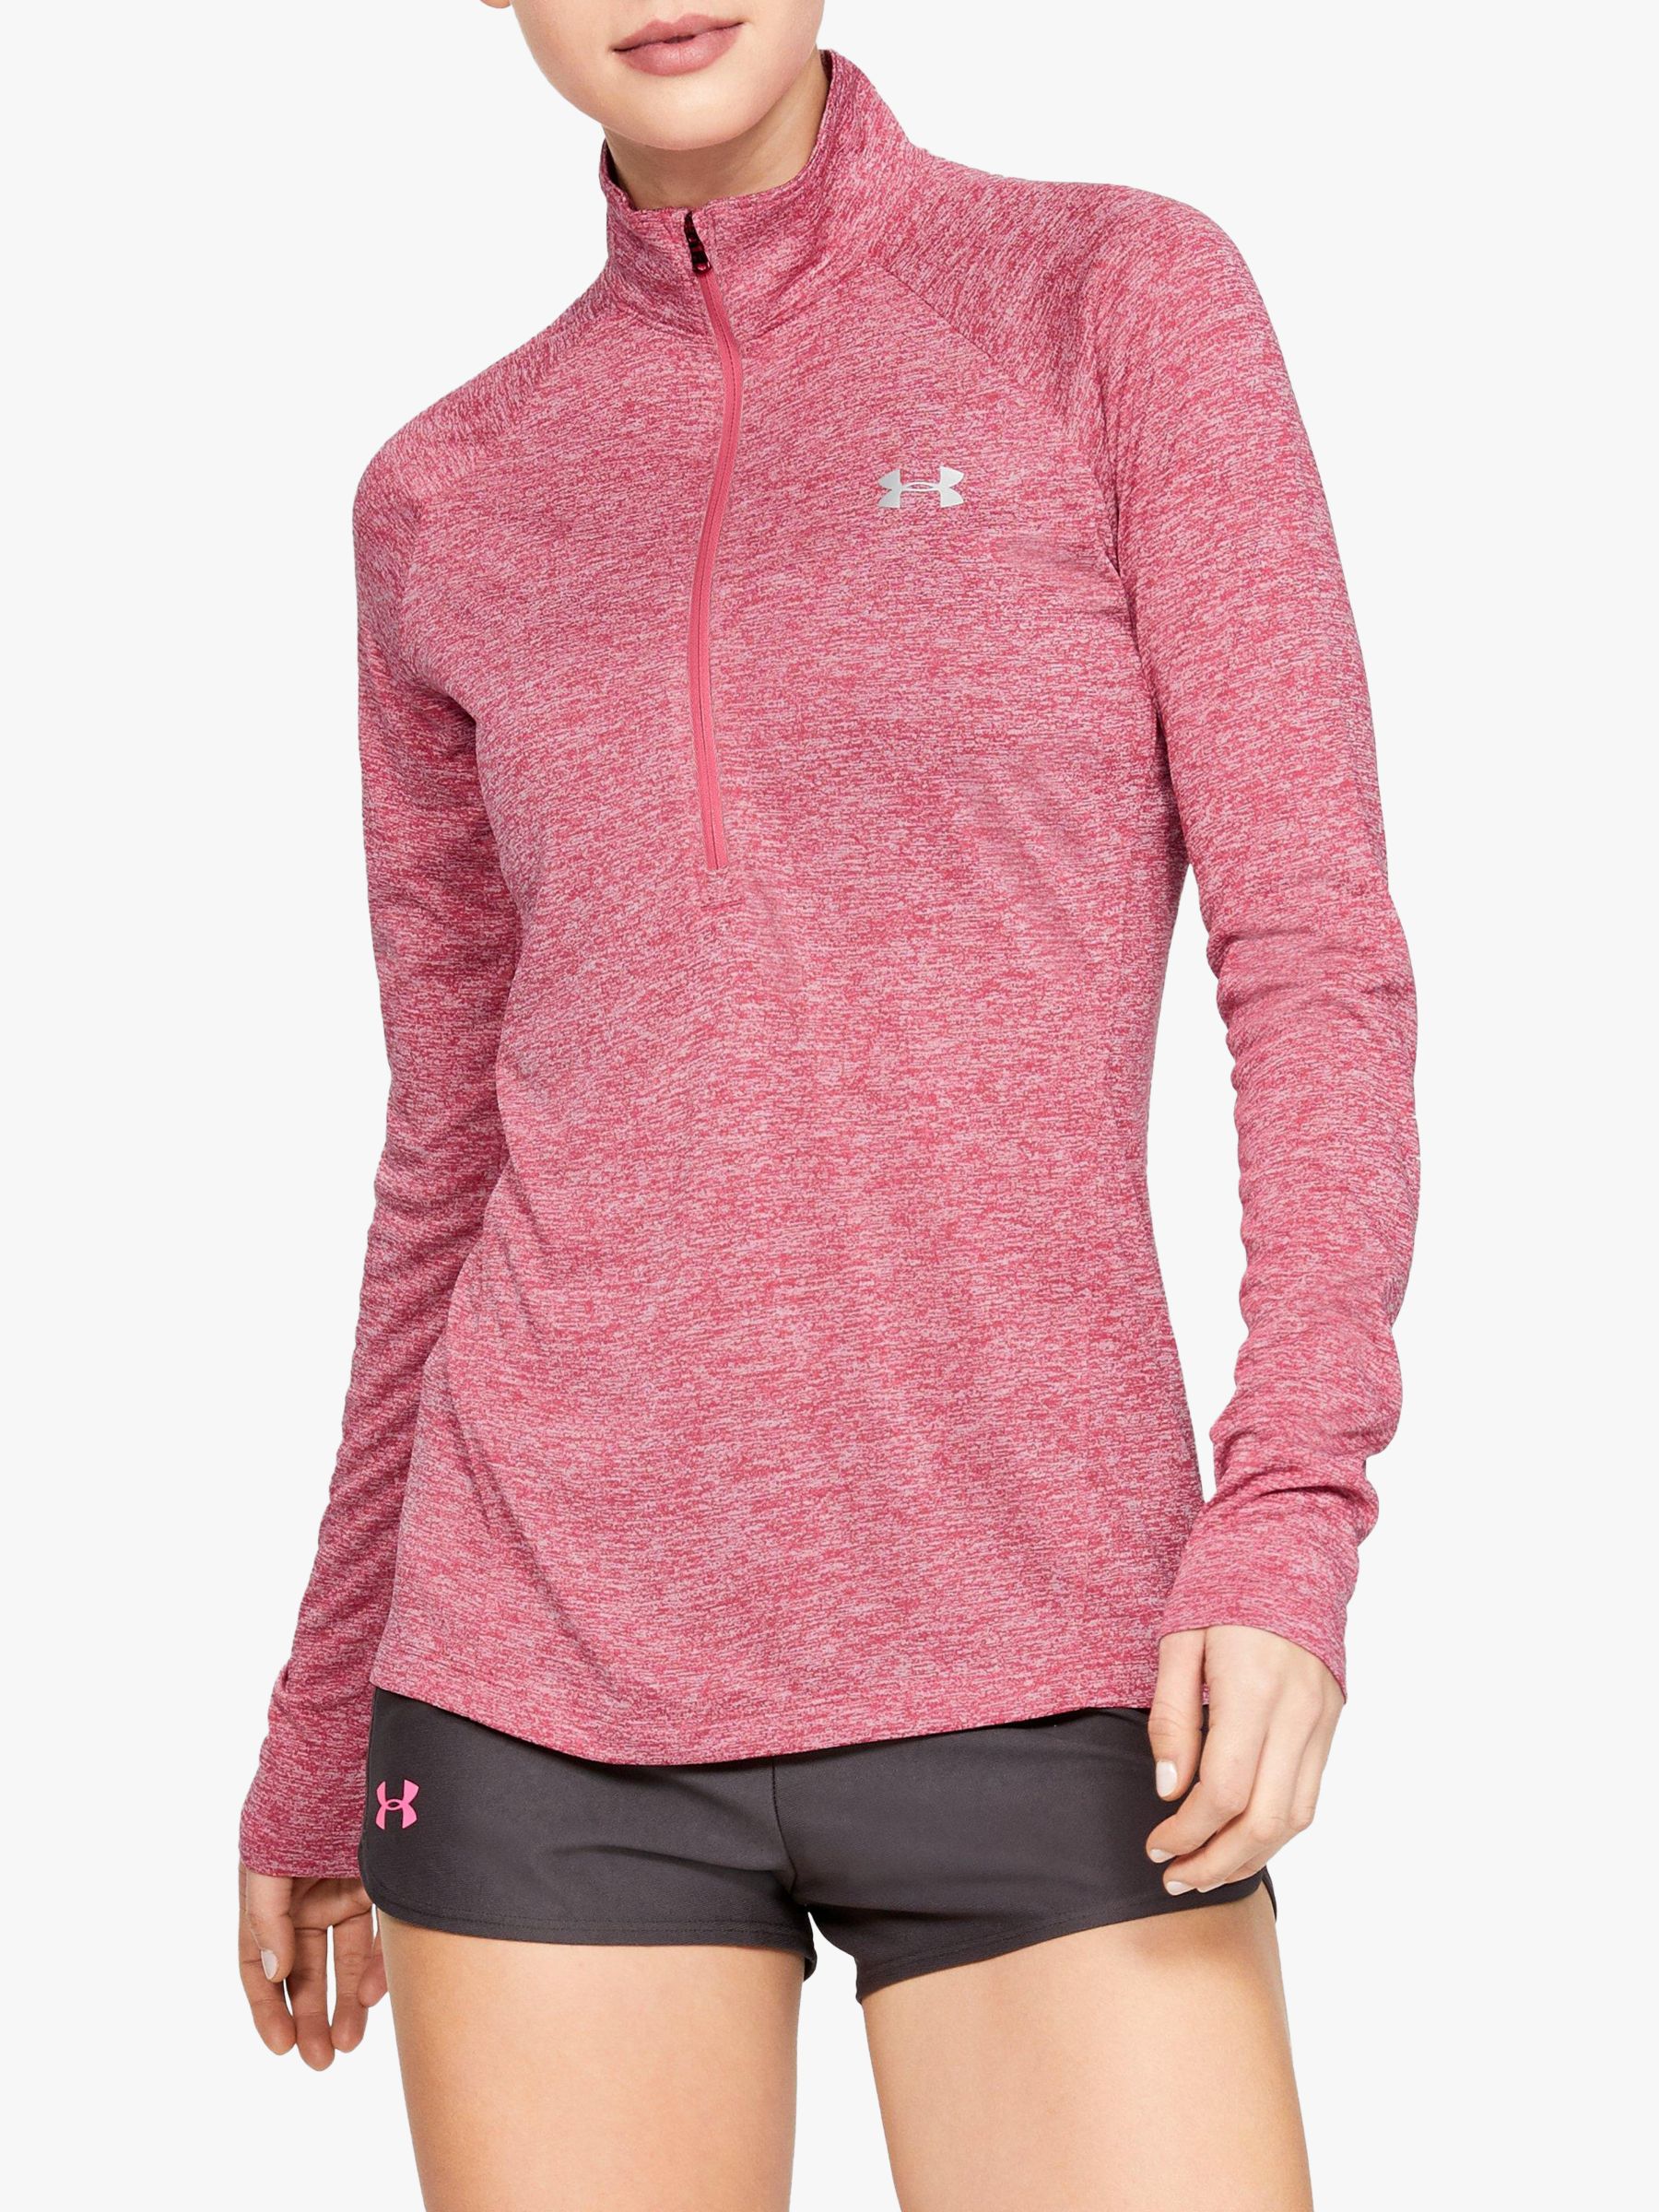 pink under armour top